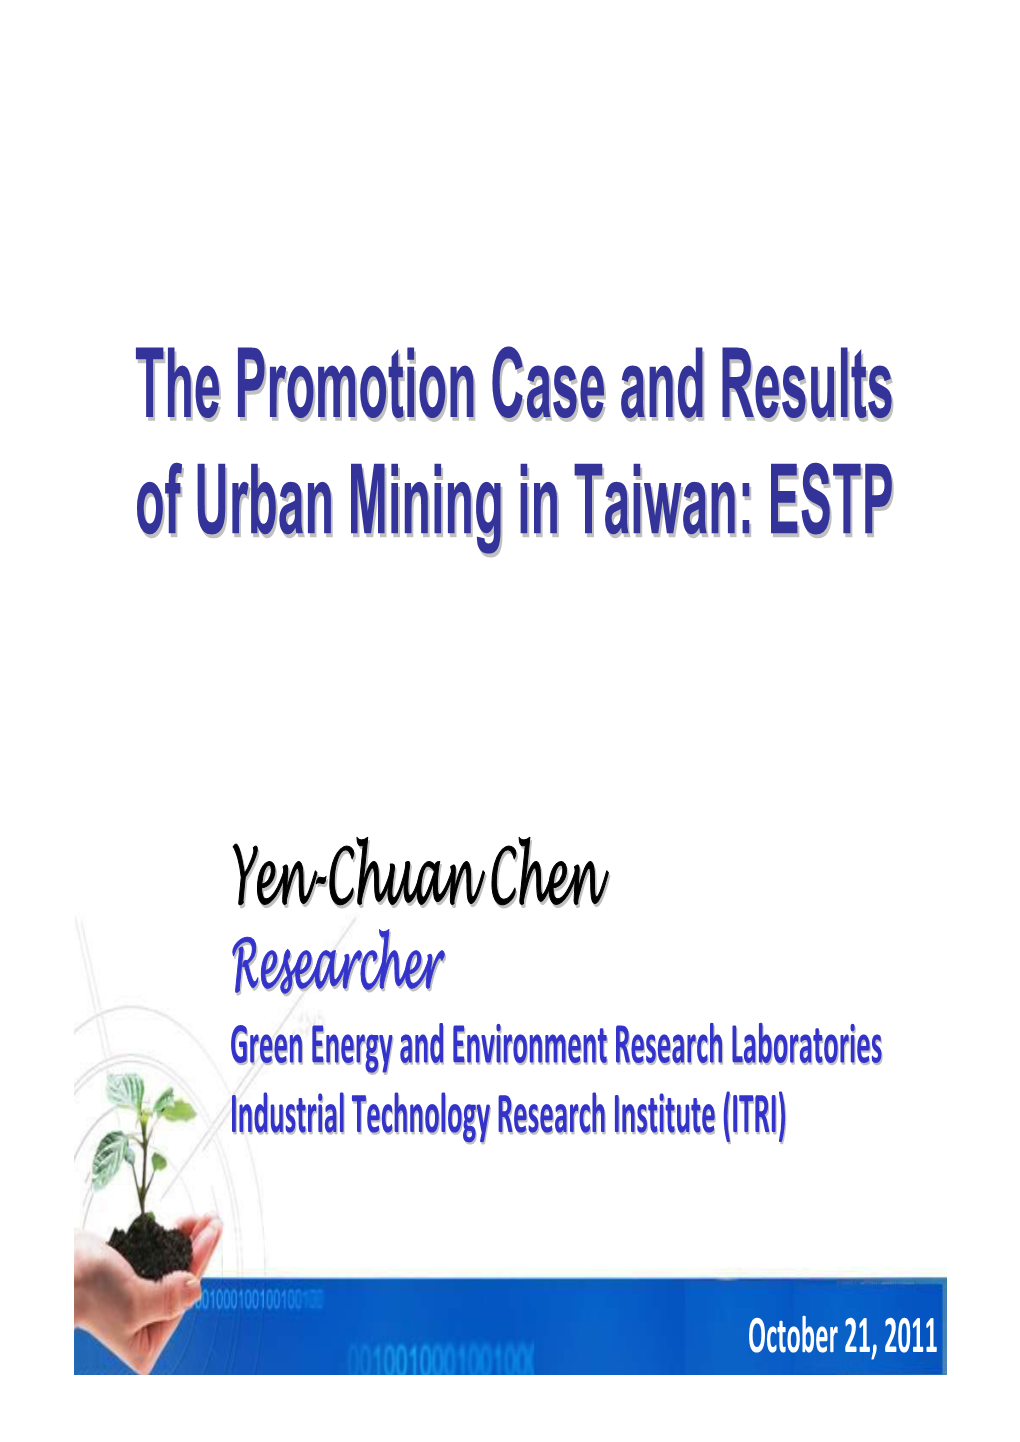 The Promotion Case and Results of Urban Mining in Taiwan: ESTP